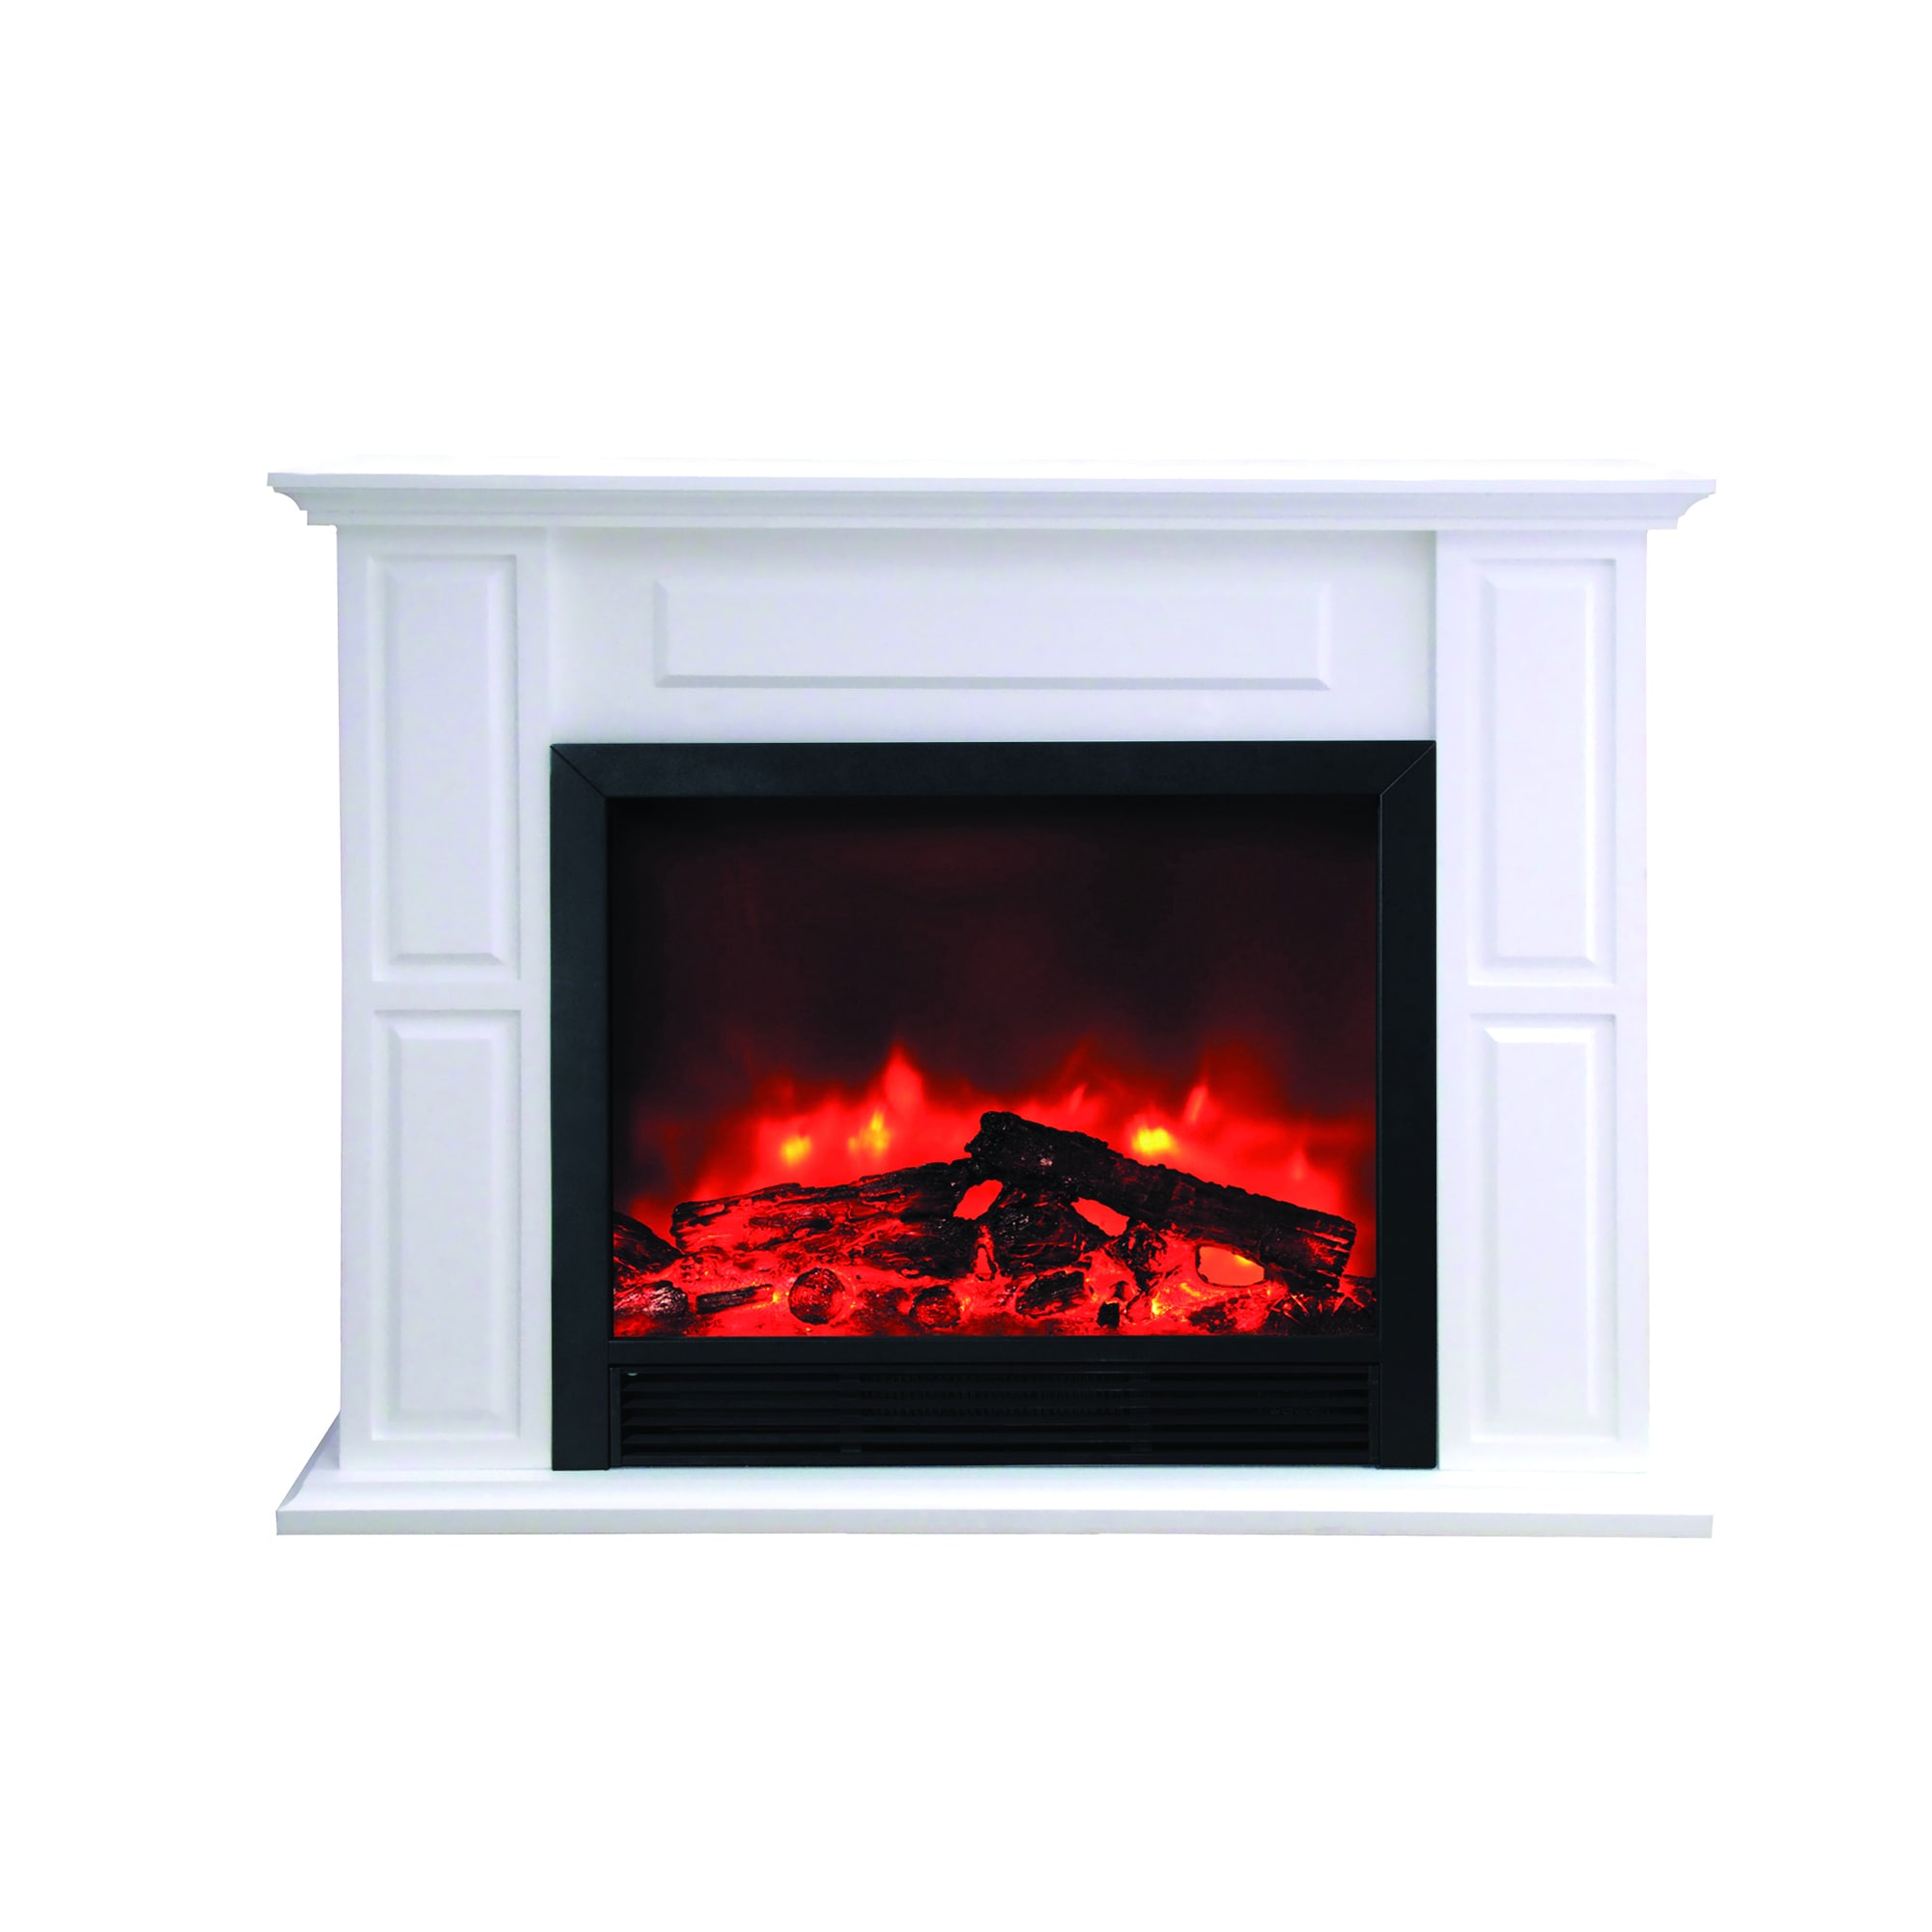 Yosemite Home Decor Electric Fireplace - Yosemite Home Decor Df Efp400 Fantasy Electric Fireplace Sleek Black Yosemite Home Dcor Heating Cooling Air Quality Fireplaces / Thousands of companies like you use panjiva to research suppliers and competitors.